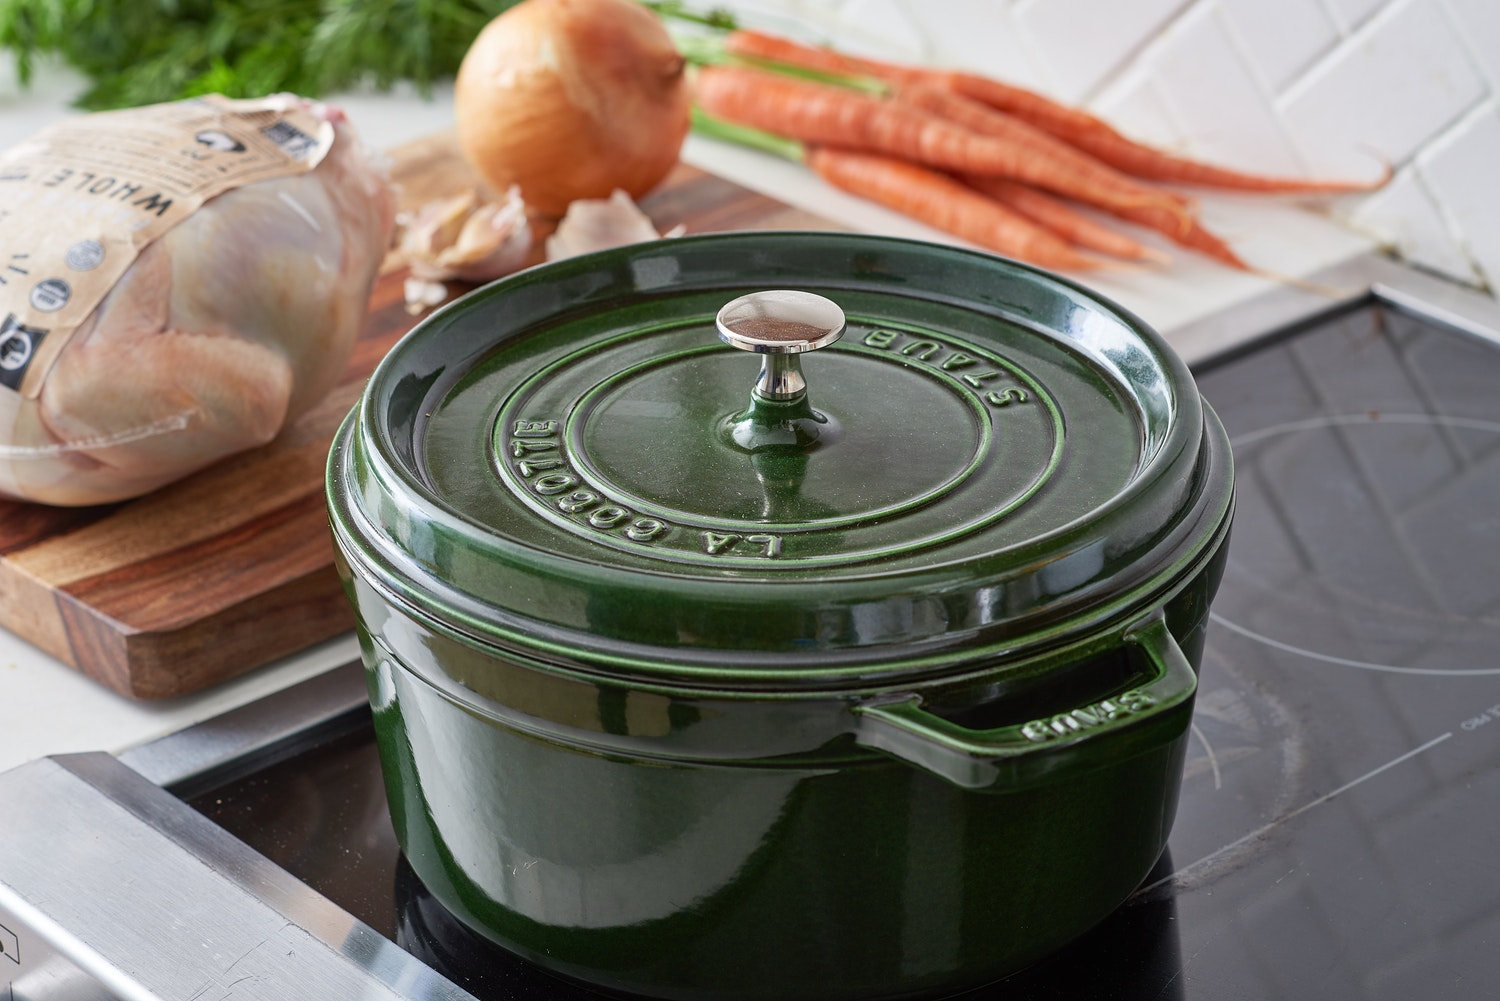 10 Things to Know Before Using Your New Dutch Oven